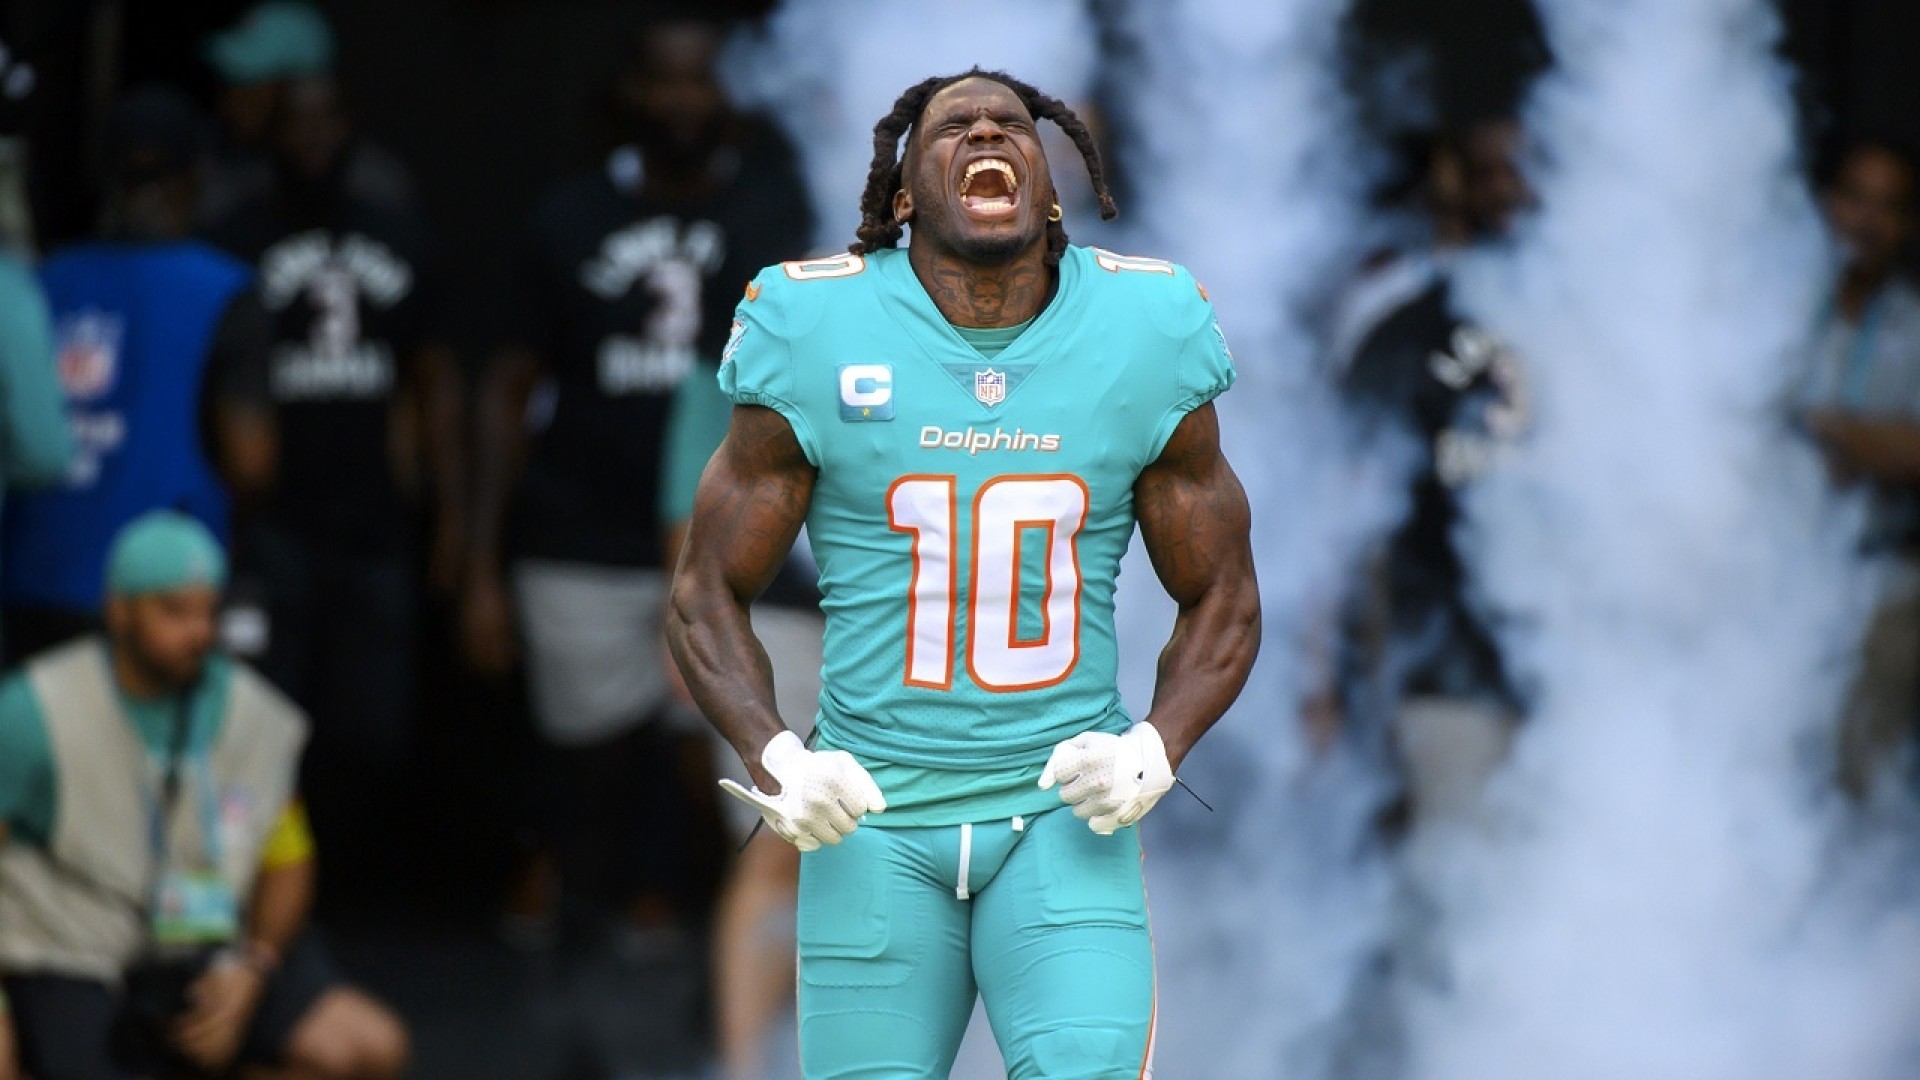 tyreek hill number dolphins